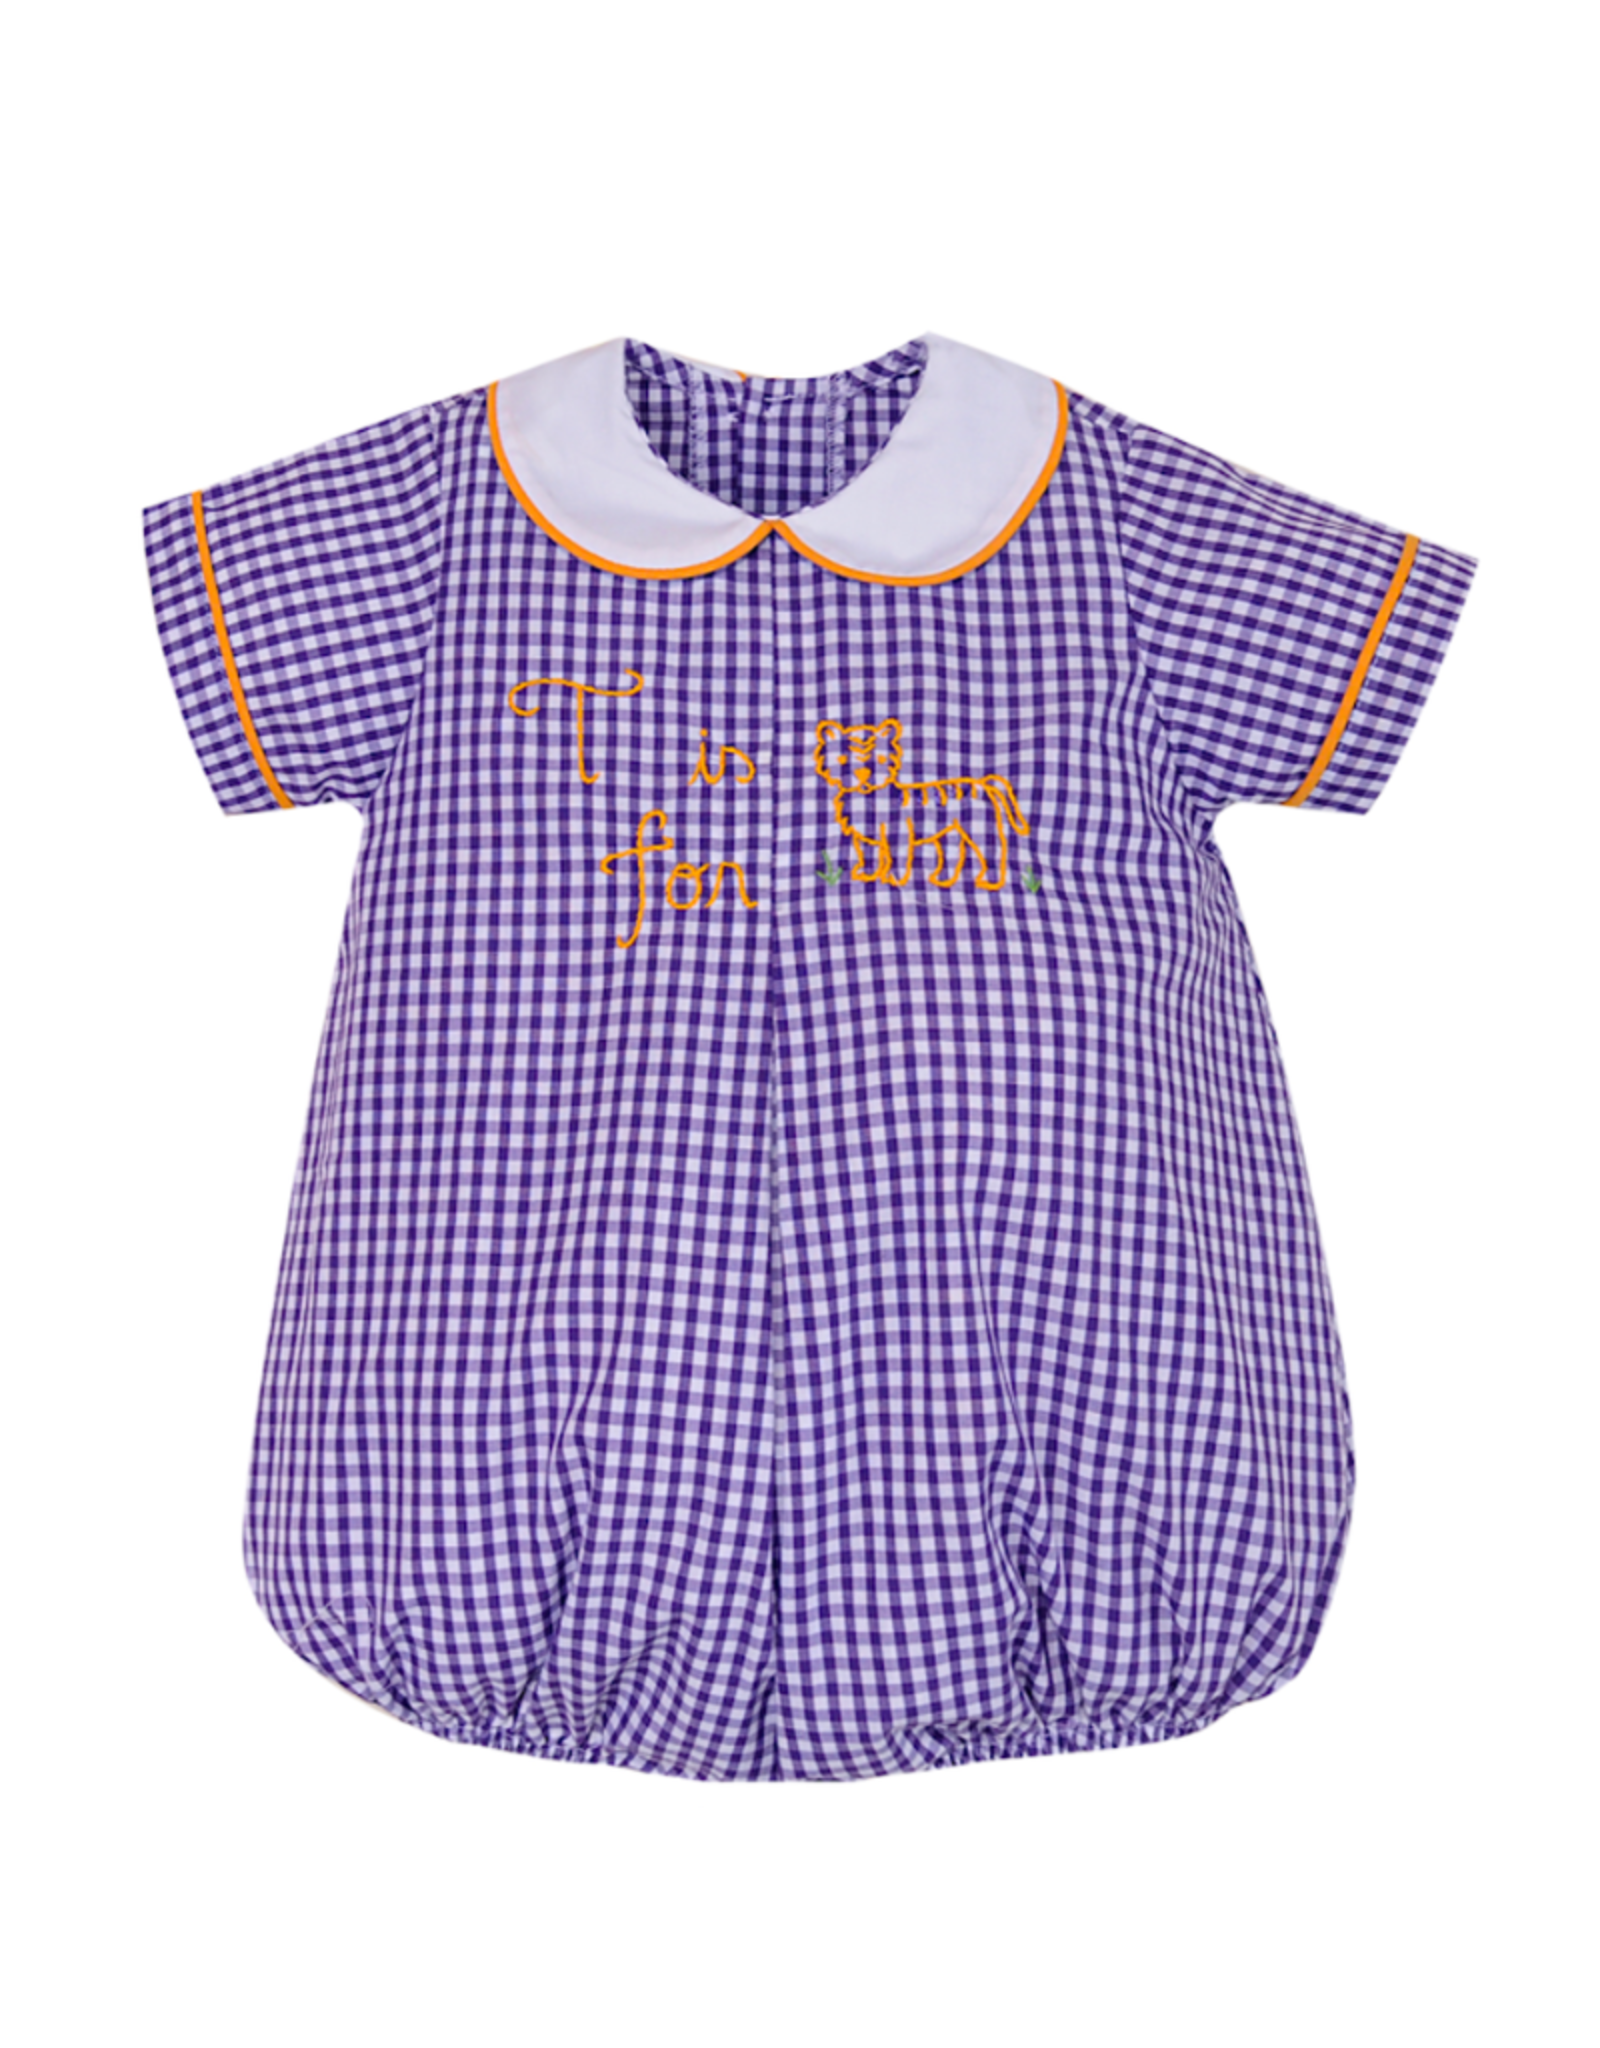 Remember Nguyen T is for Tiger Boy Bubble, Purple Gingham